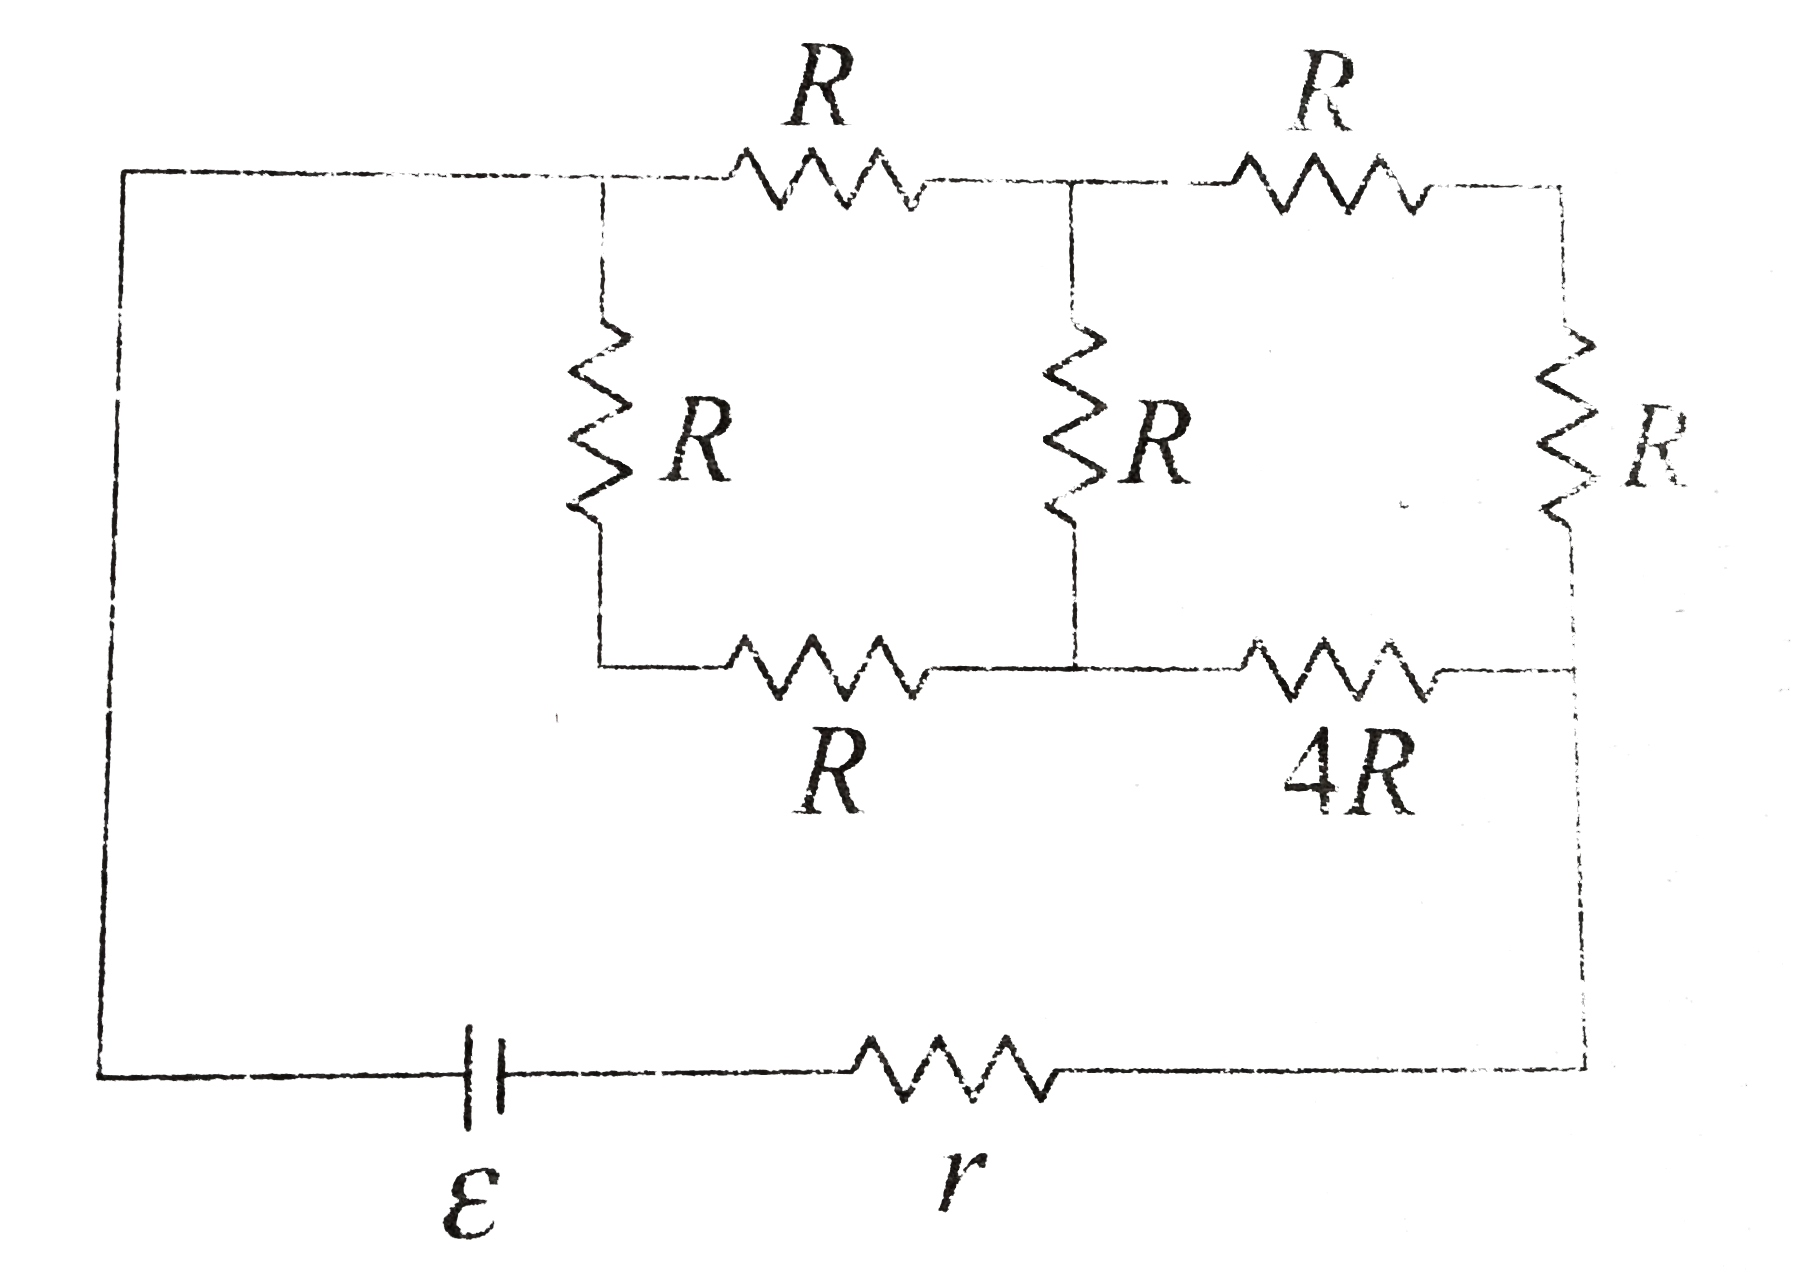 The relation between R and r (internal resistance of the battery) for which the power consumed in the external part of the circuit is maximum.